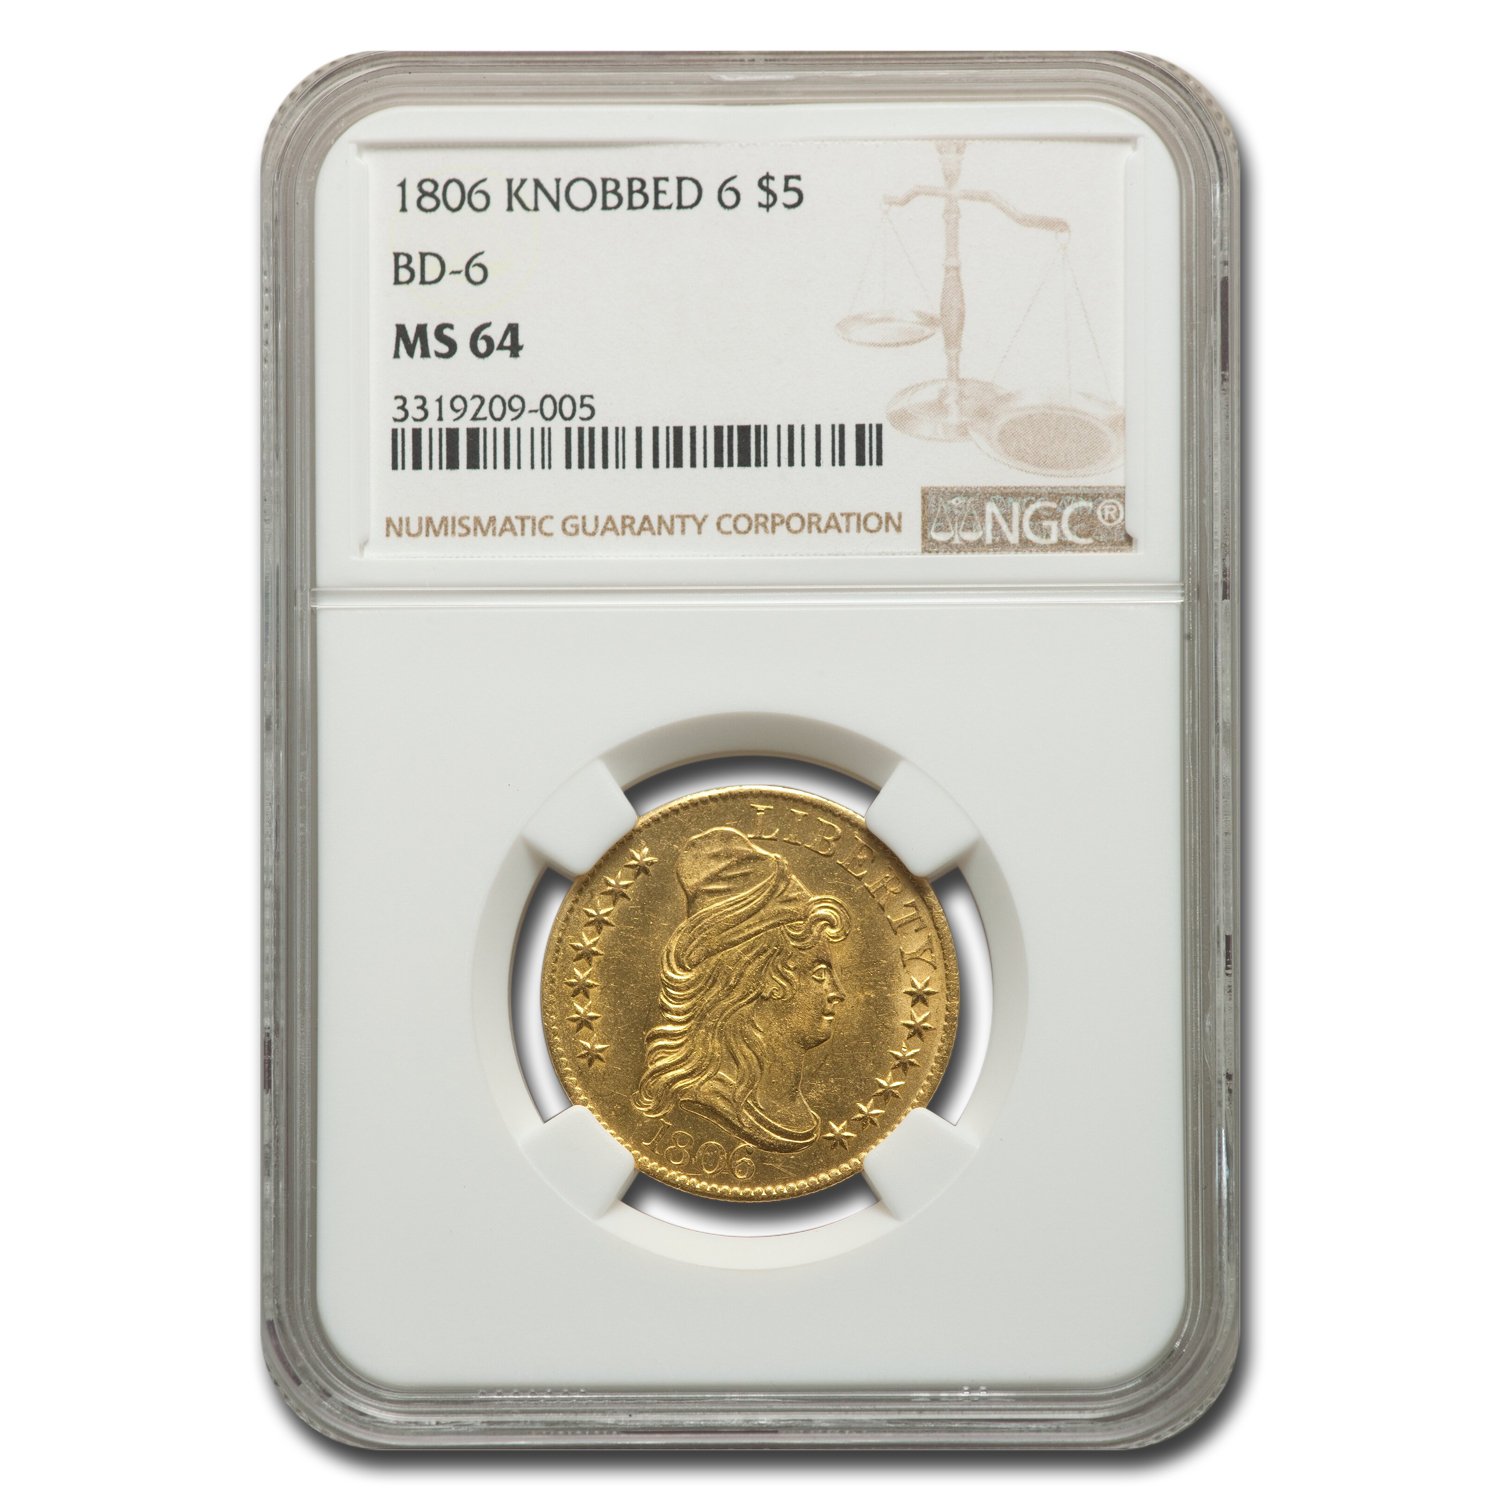 Buy 1806 $5 Capped Bust Gold Half Eagle Knobbed 6 MS-64 NGC (BD-6) - Click Image to Close